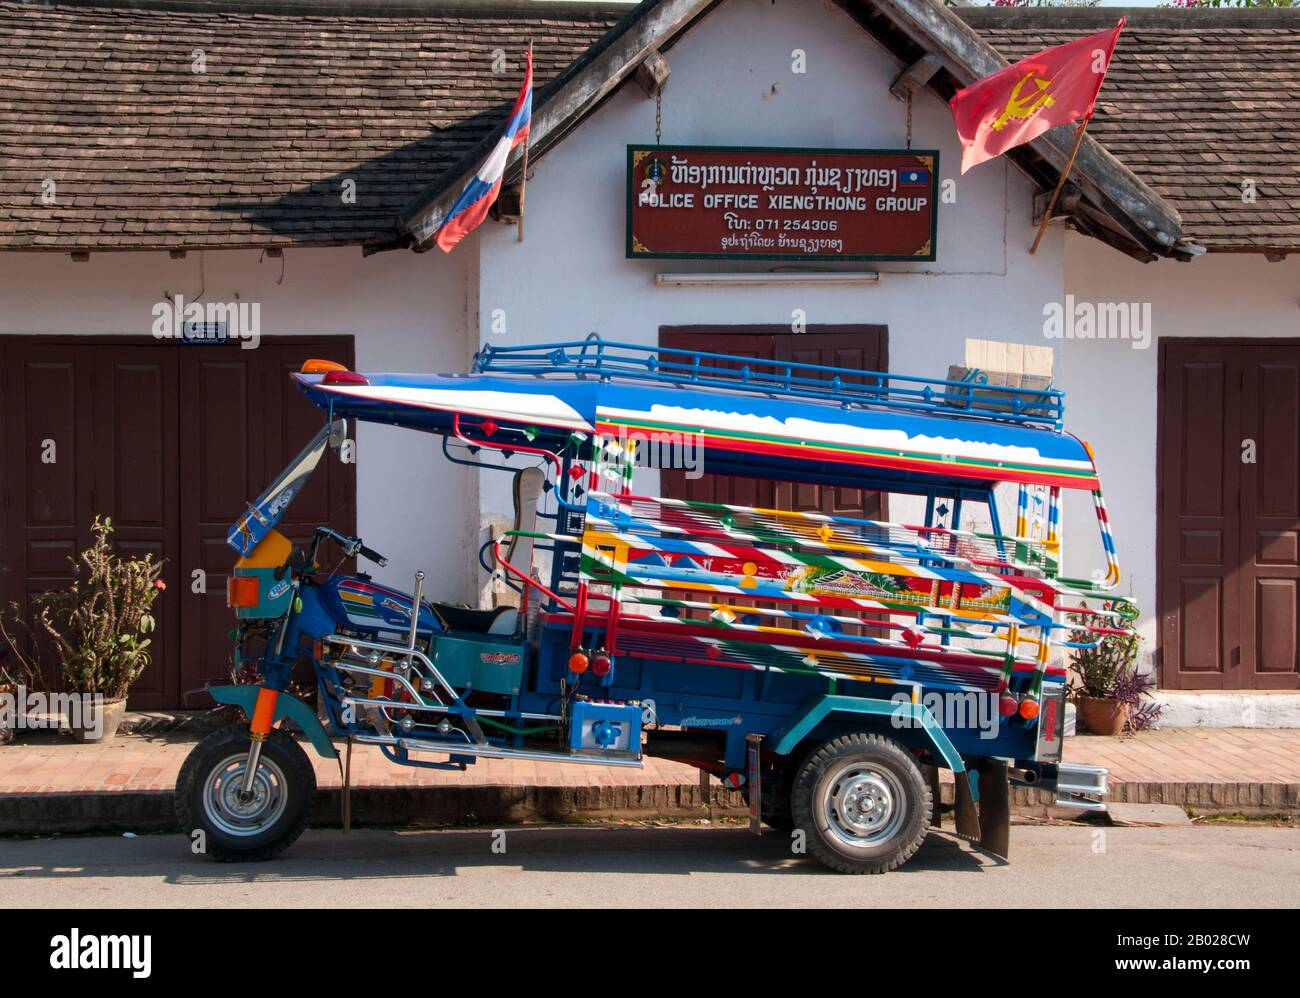 The ‘jumbo’ is a three-wheeled taxi and is the common form of transportation in Laos' larger towns. They are modified motorbikes with two covered benches in the back that seat about six people quite comfortably.   Luang Prabang was formerly the capital of a kingdom of the same name. Until the communist takeover in 1975, it was the royal capital and seat of government of the Kingdom of Laos. The city is nowadays a UNESCO World Heritage Site. Stock Photo